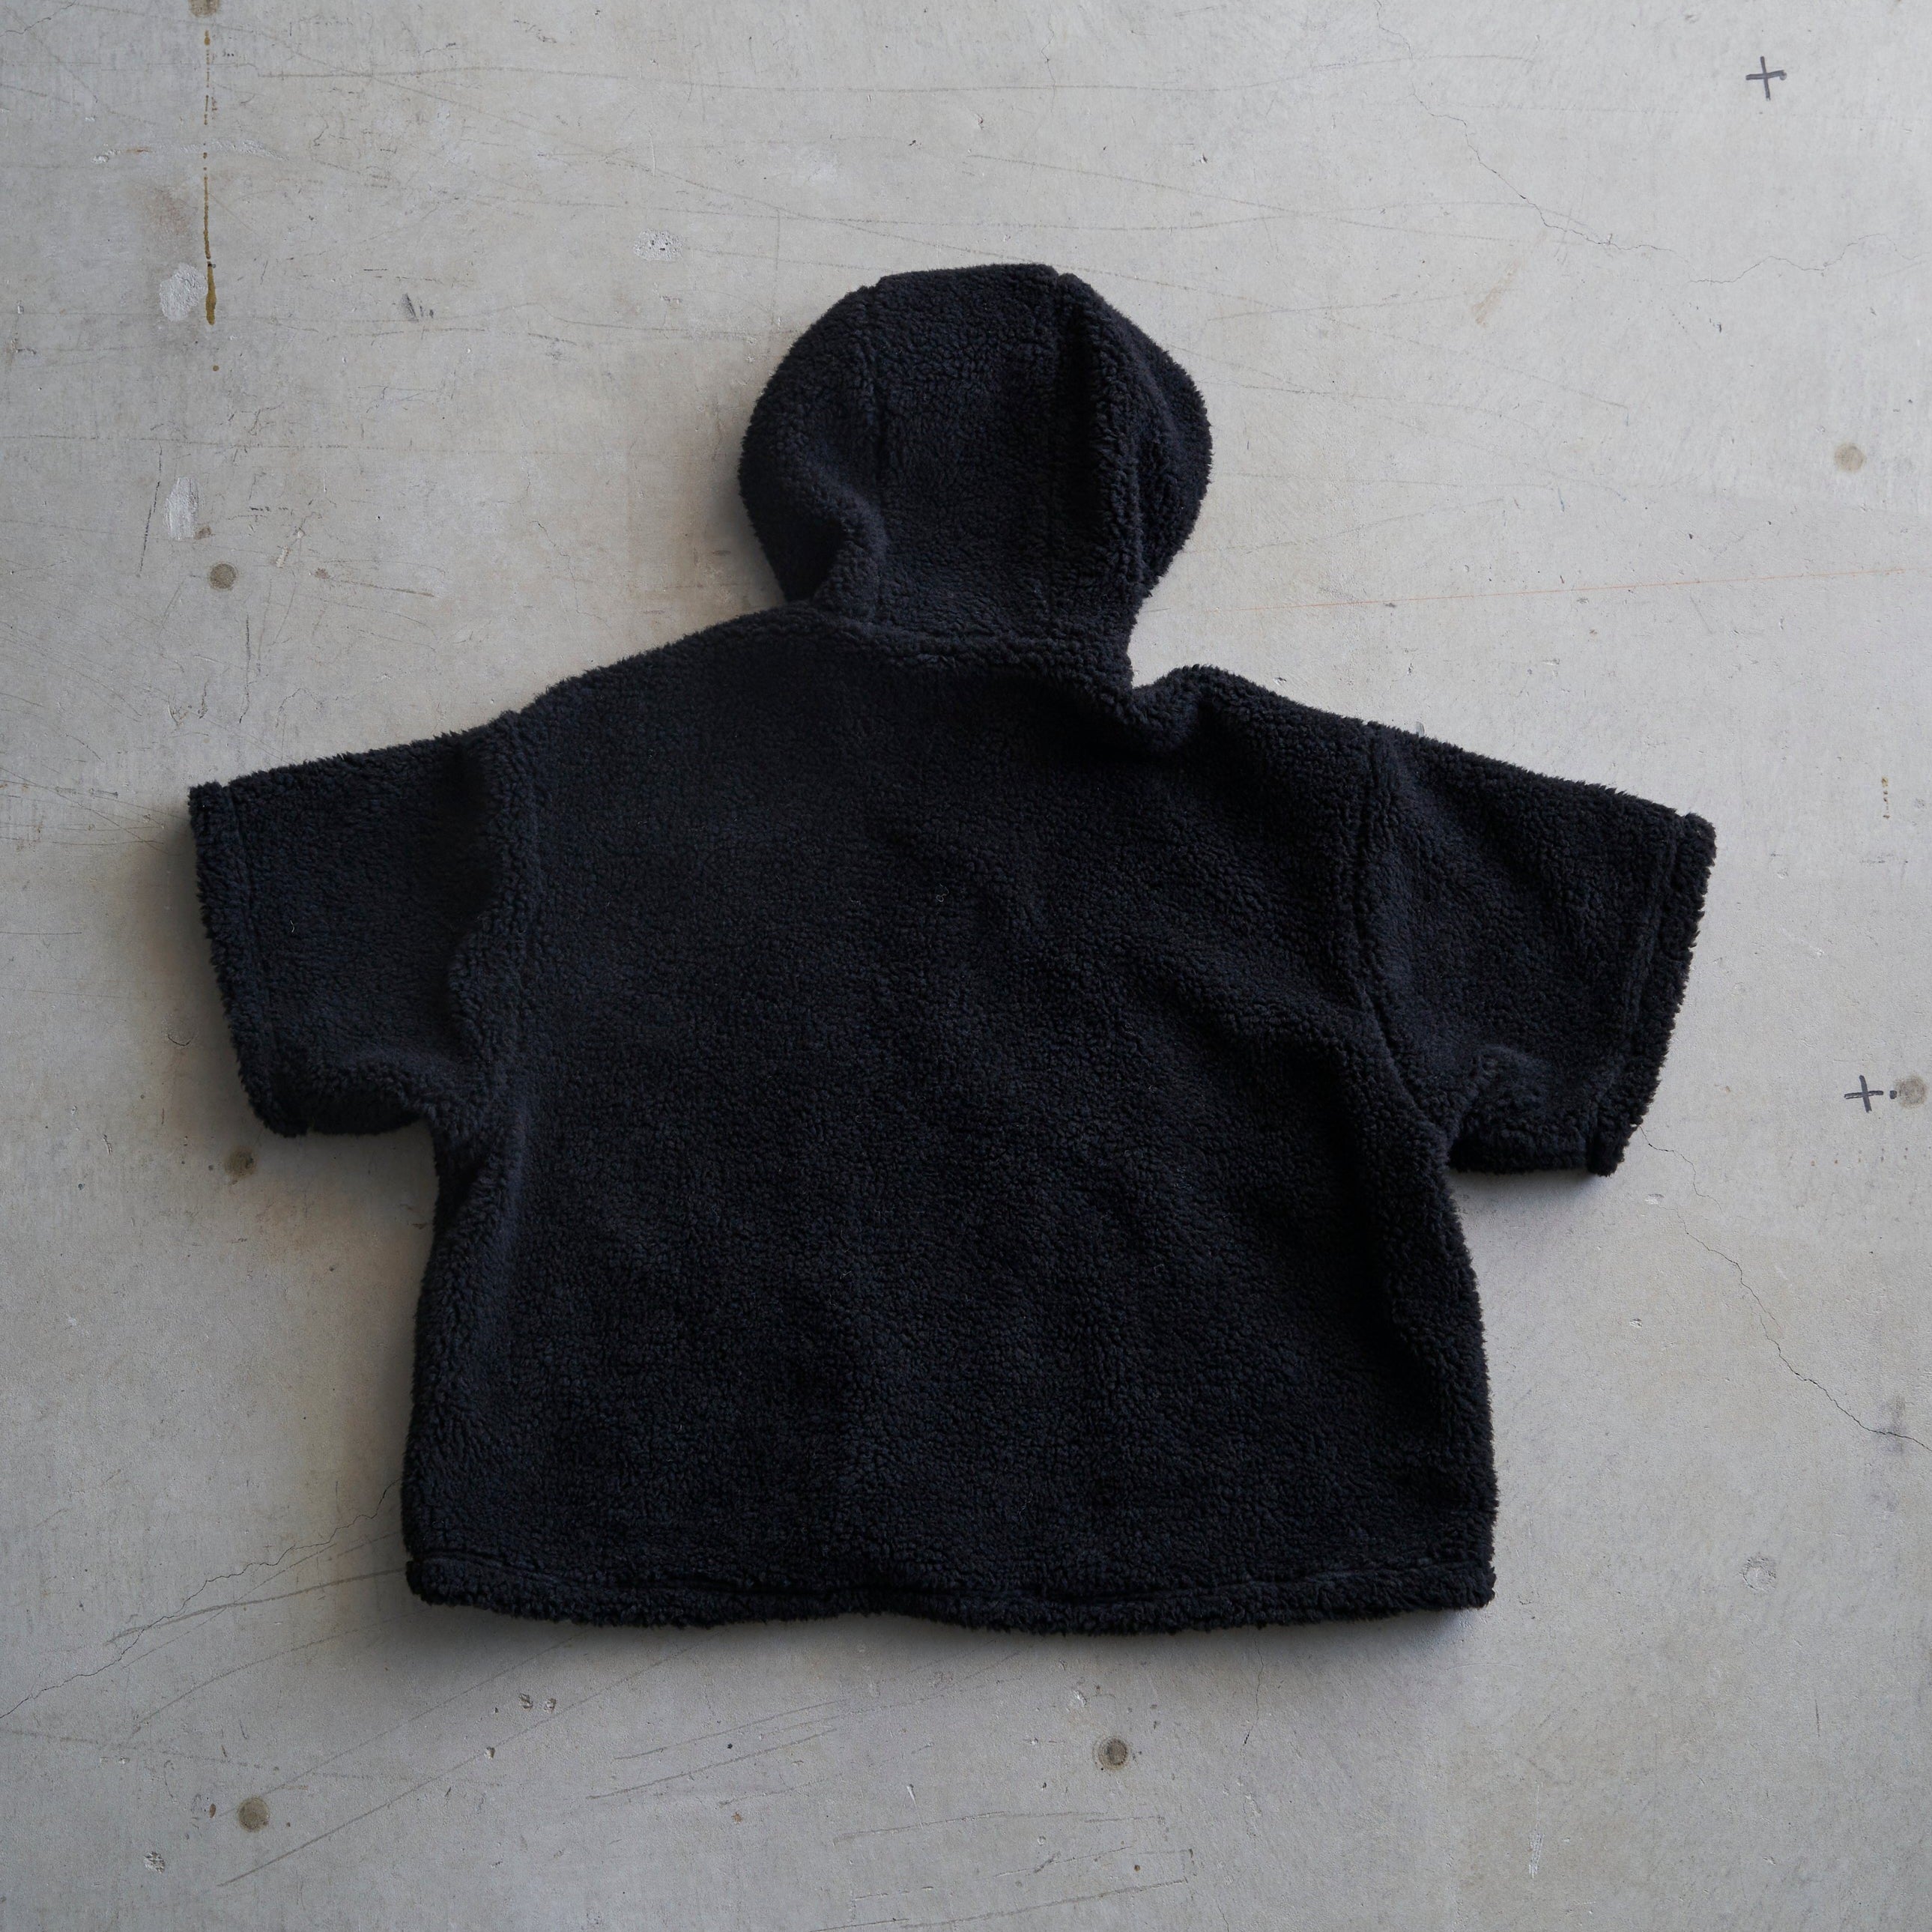 Y(dot) BY NORDISK / THM FLEECE HOODIE  is-ness x Y(dot) BY NORDISK